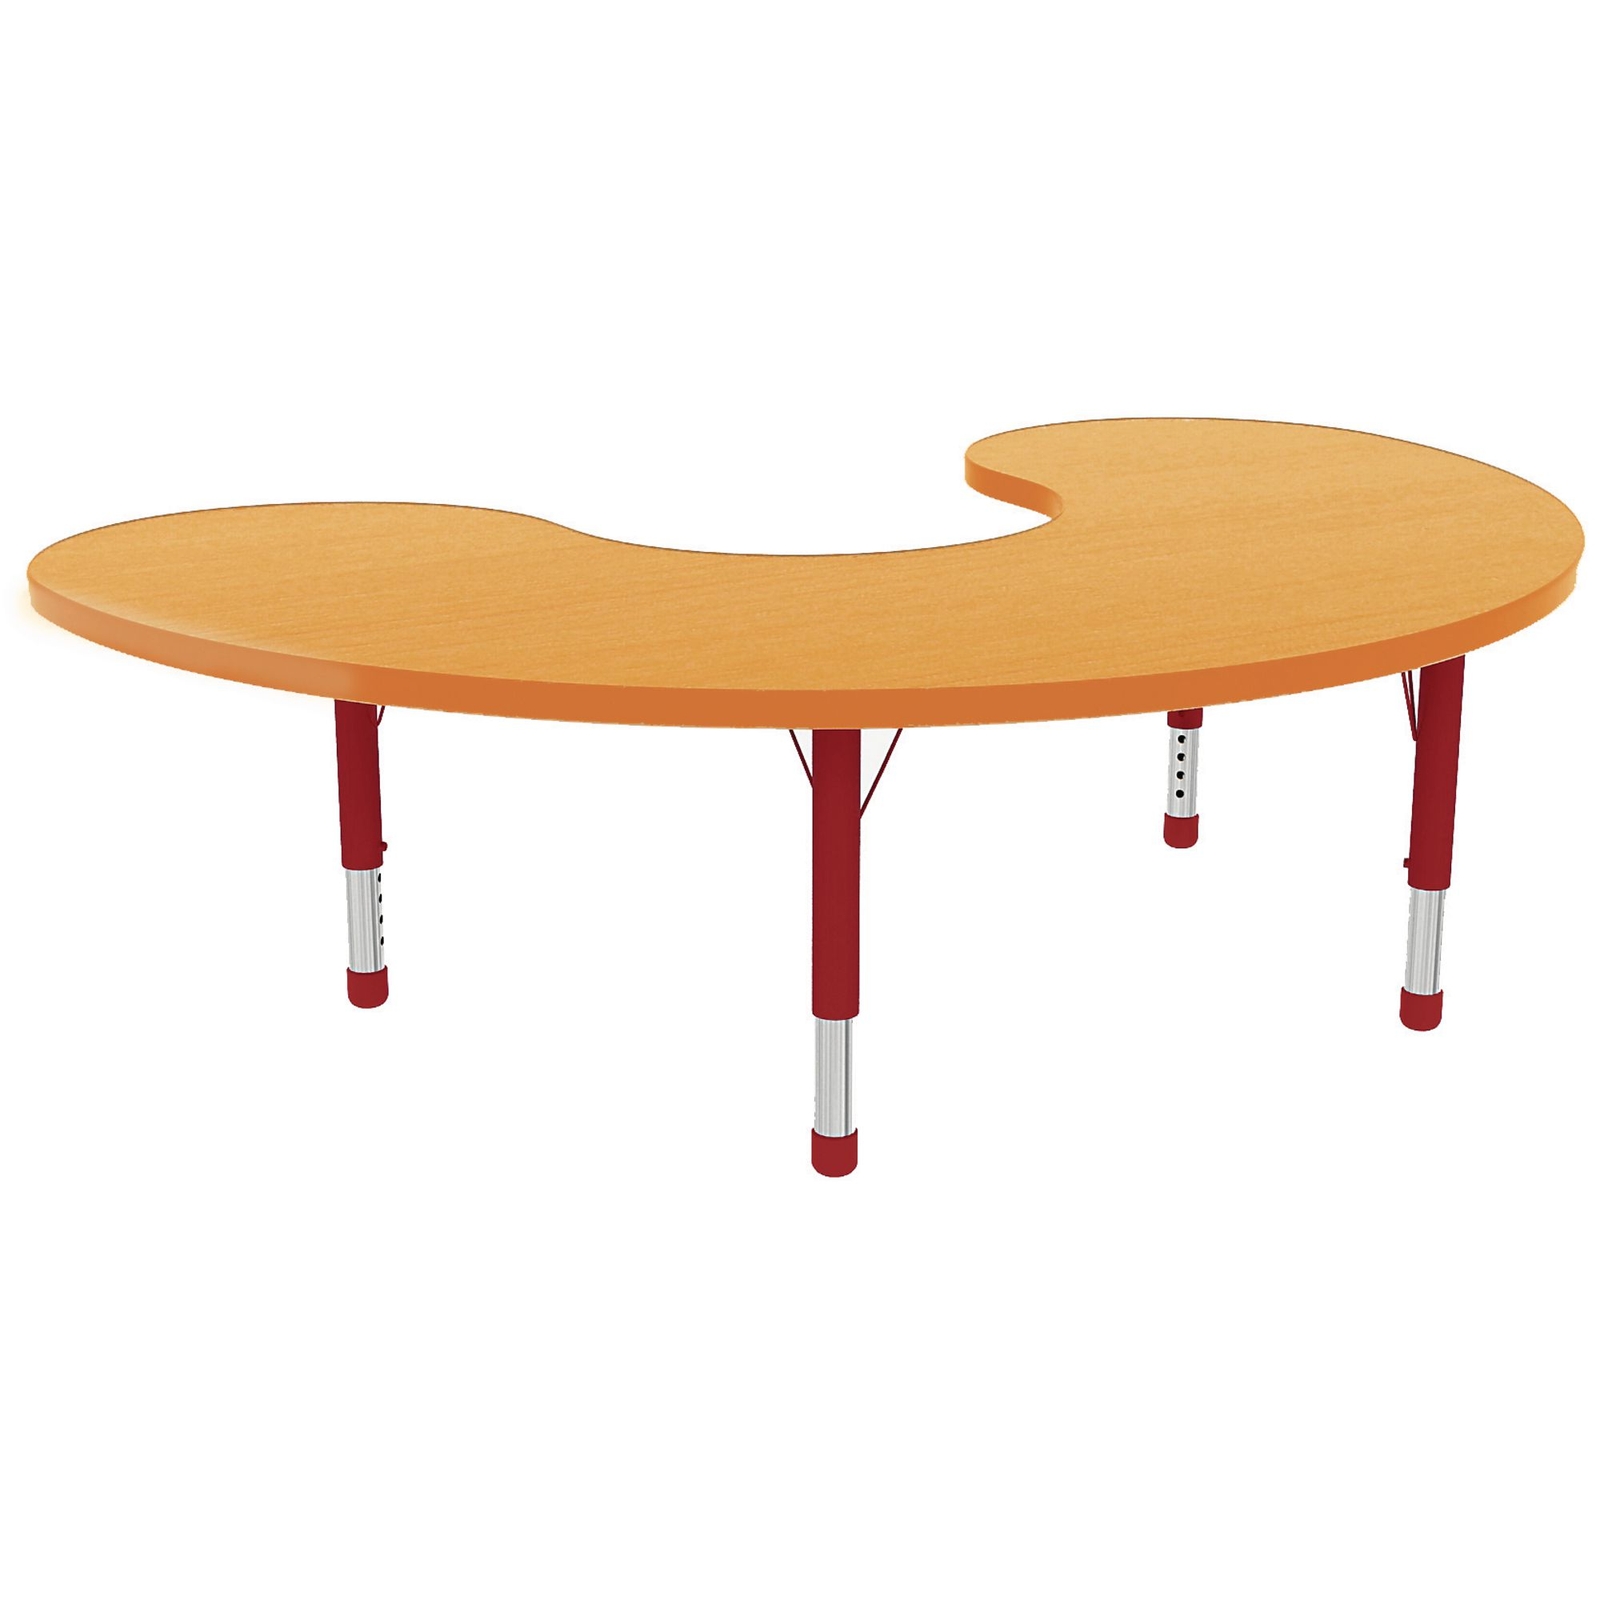 Milan Group 6 Seater 48mm Tubular Classroom Table - 1800 x 1200 x 370 to 620mm - red